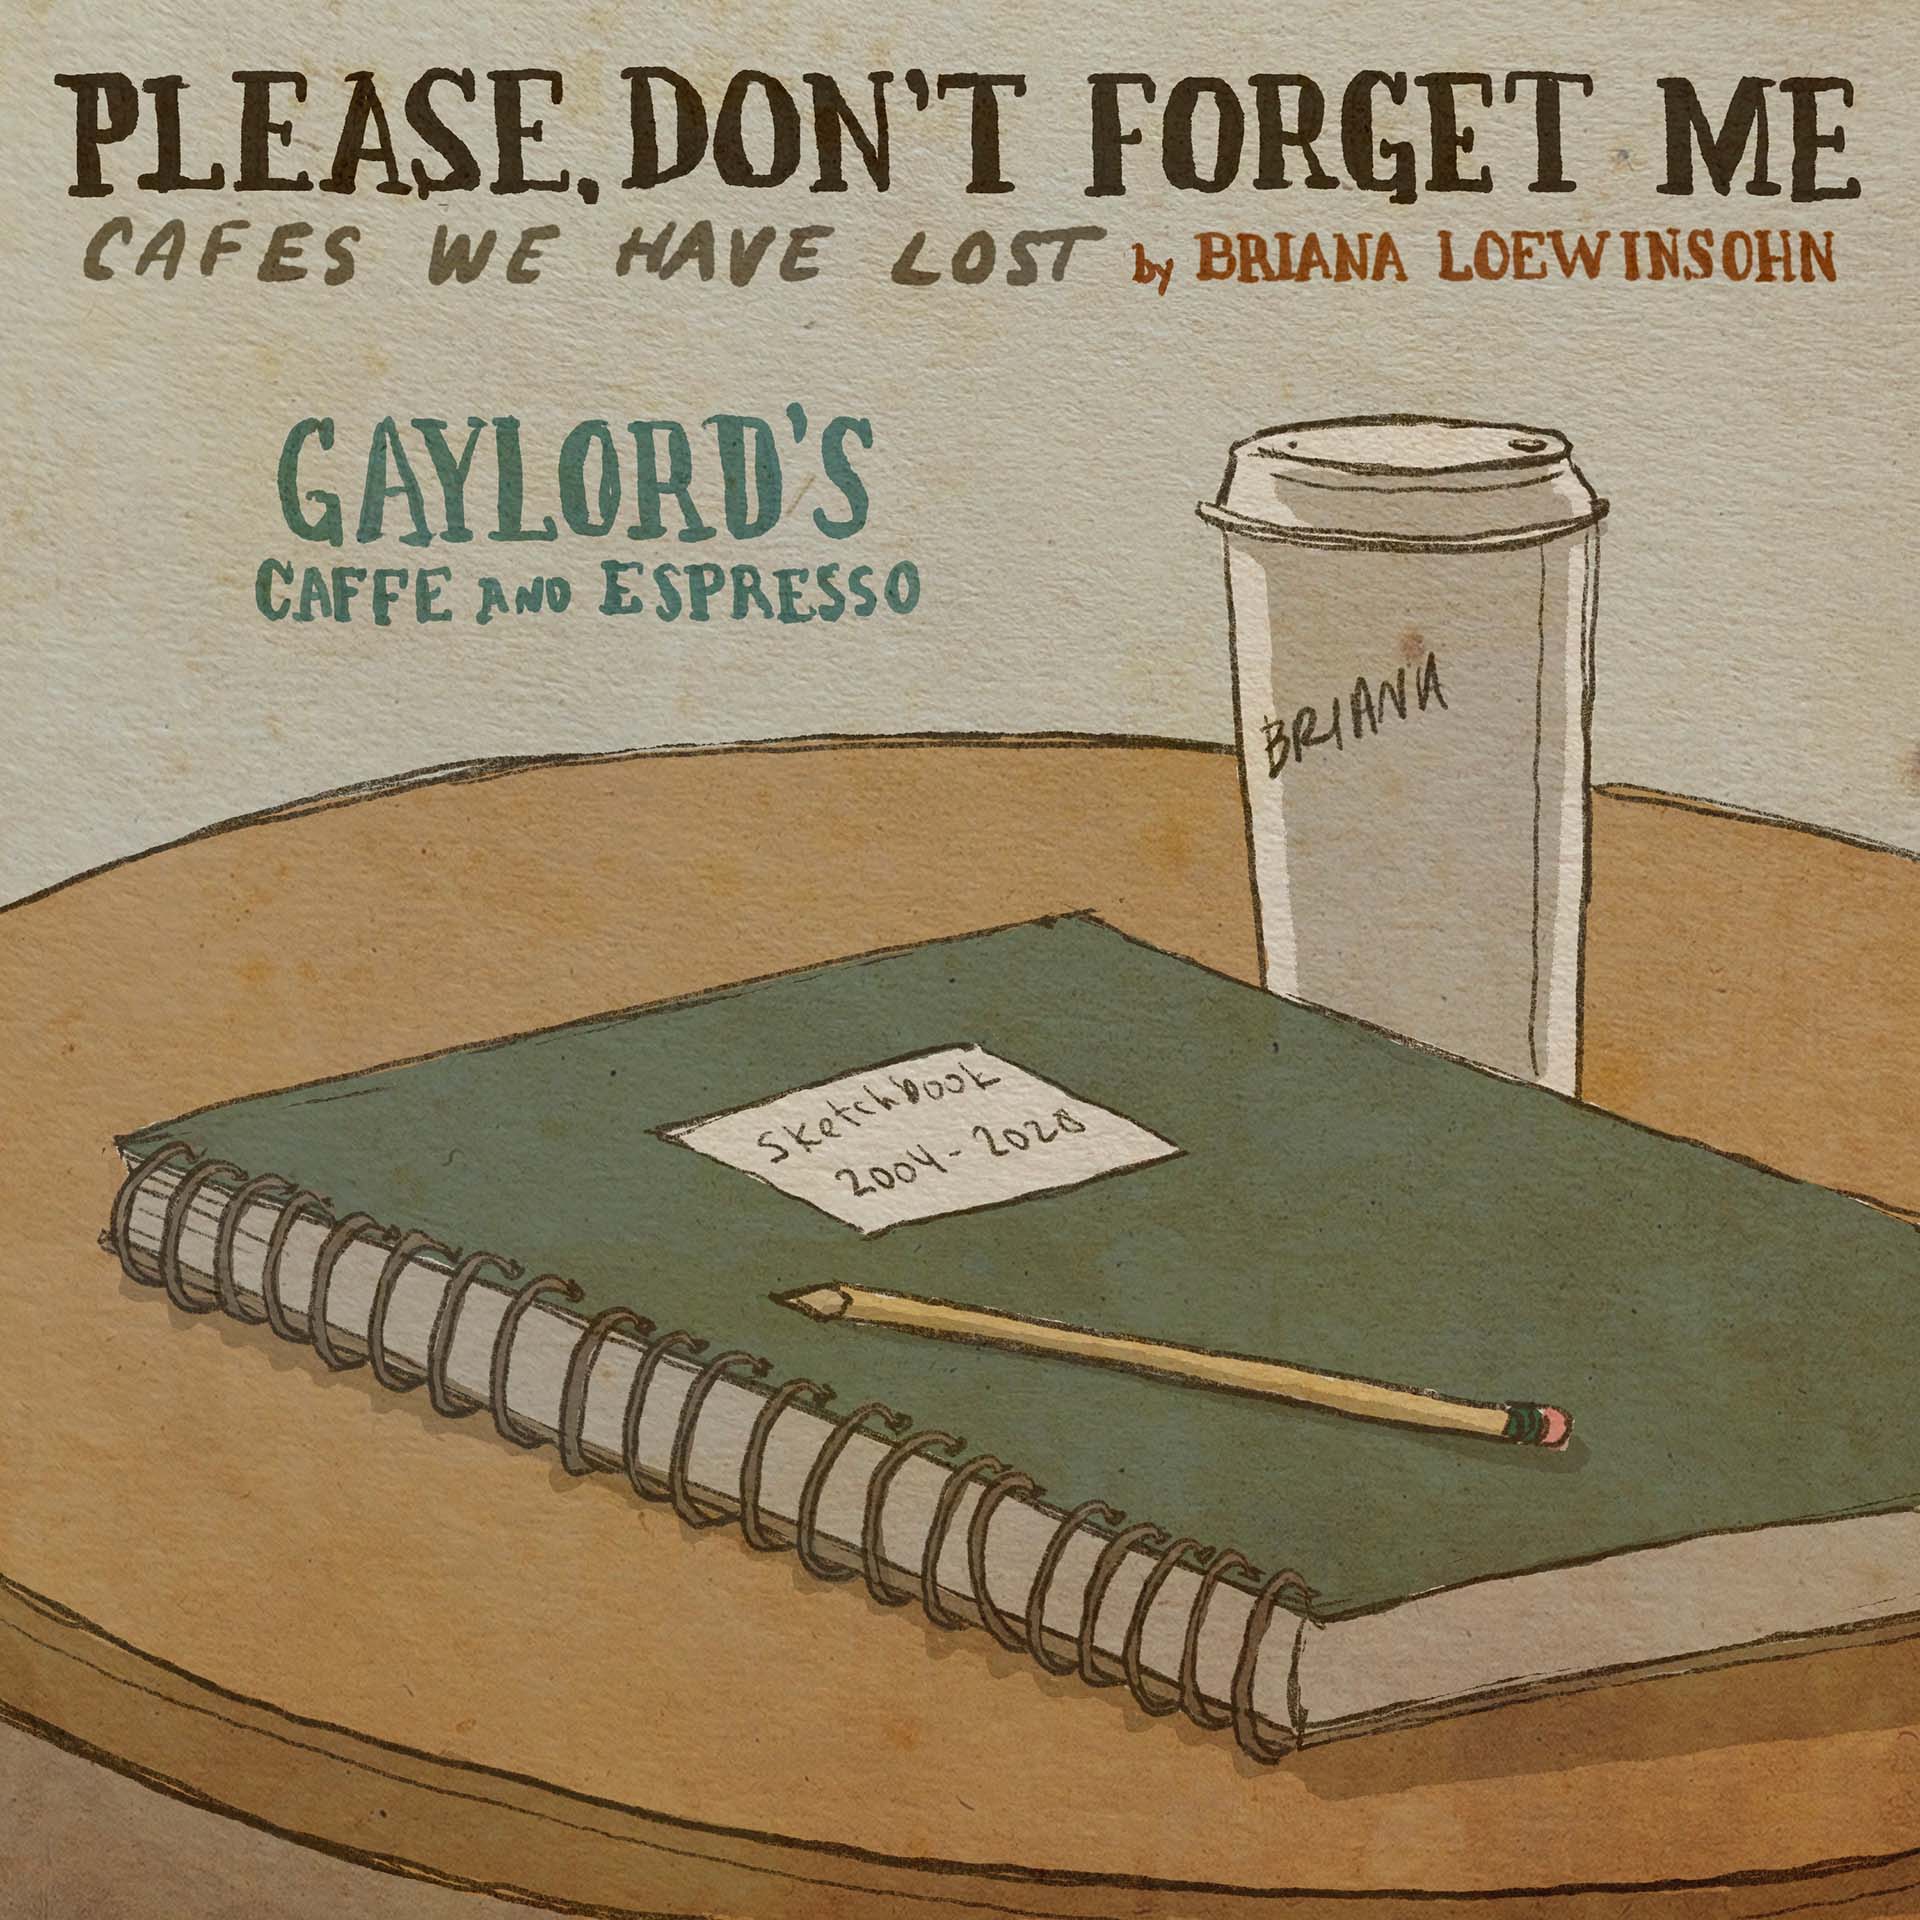 Title panel for a comic shows a green sketchpad, a pencil and a white disposable coffee cup on a round table. The text reads, "Please, Don't Forget Me: Cafes We Have Lost" and underneath that, "Gaylord's Caffe and Espresso".